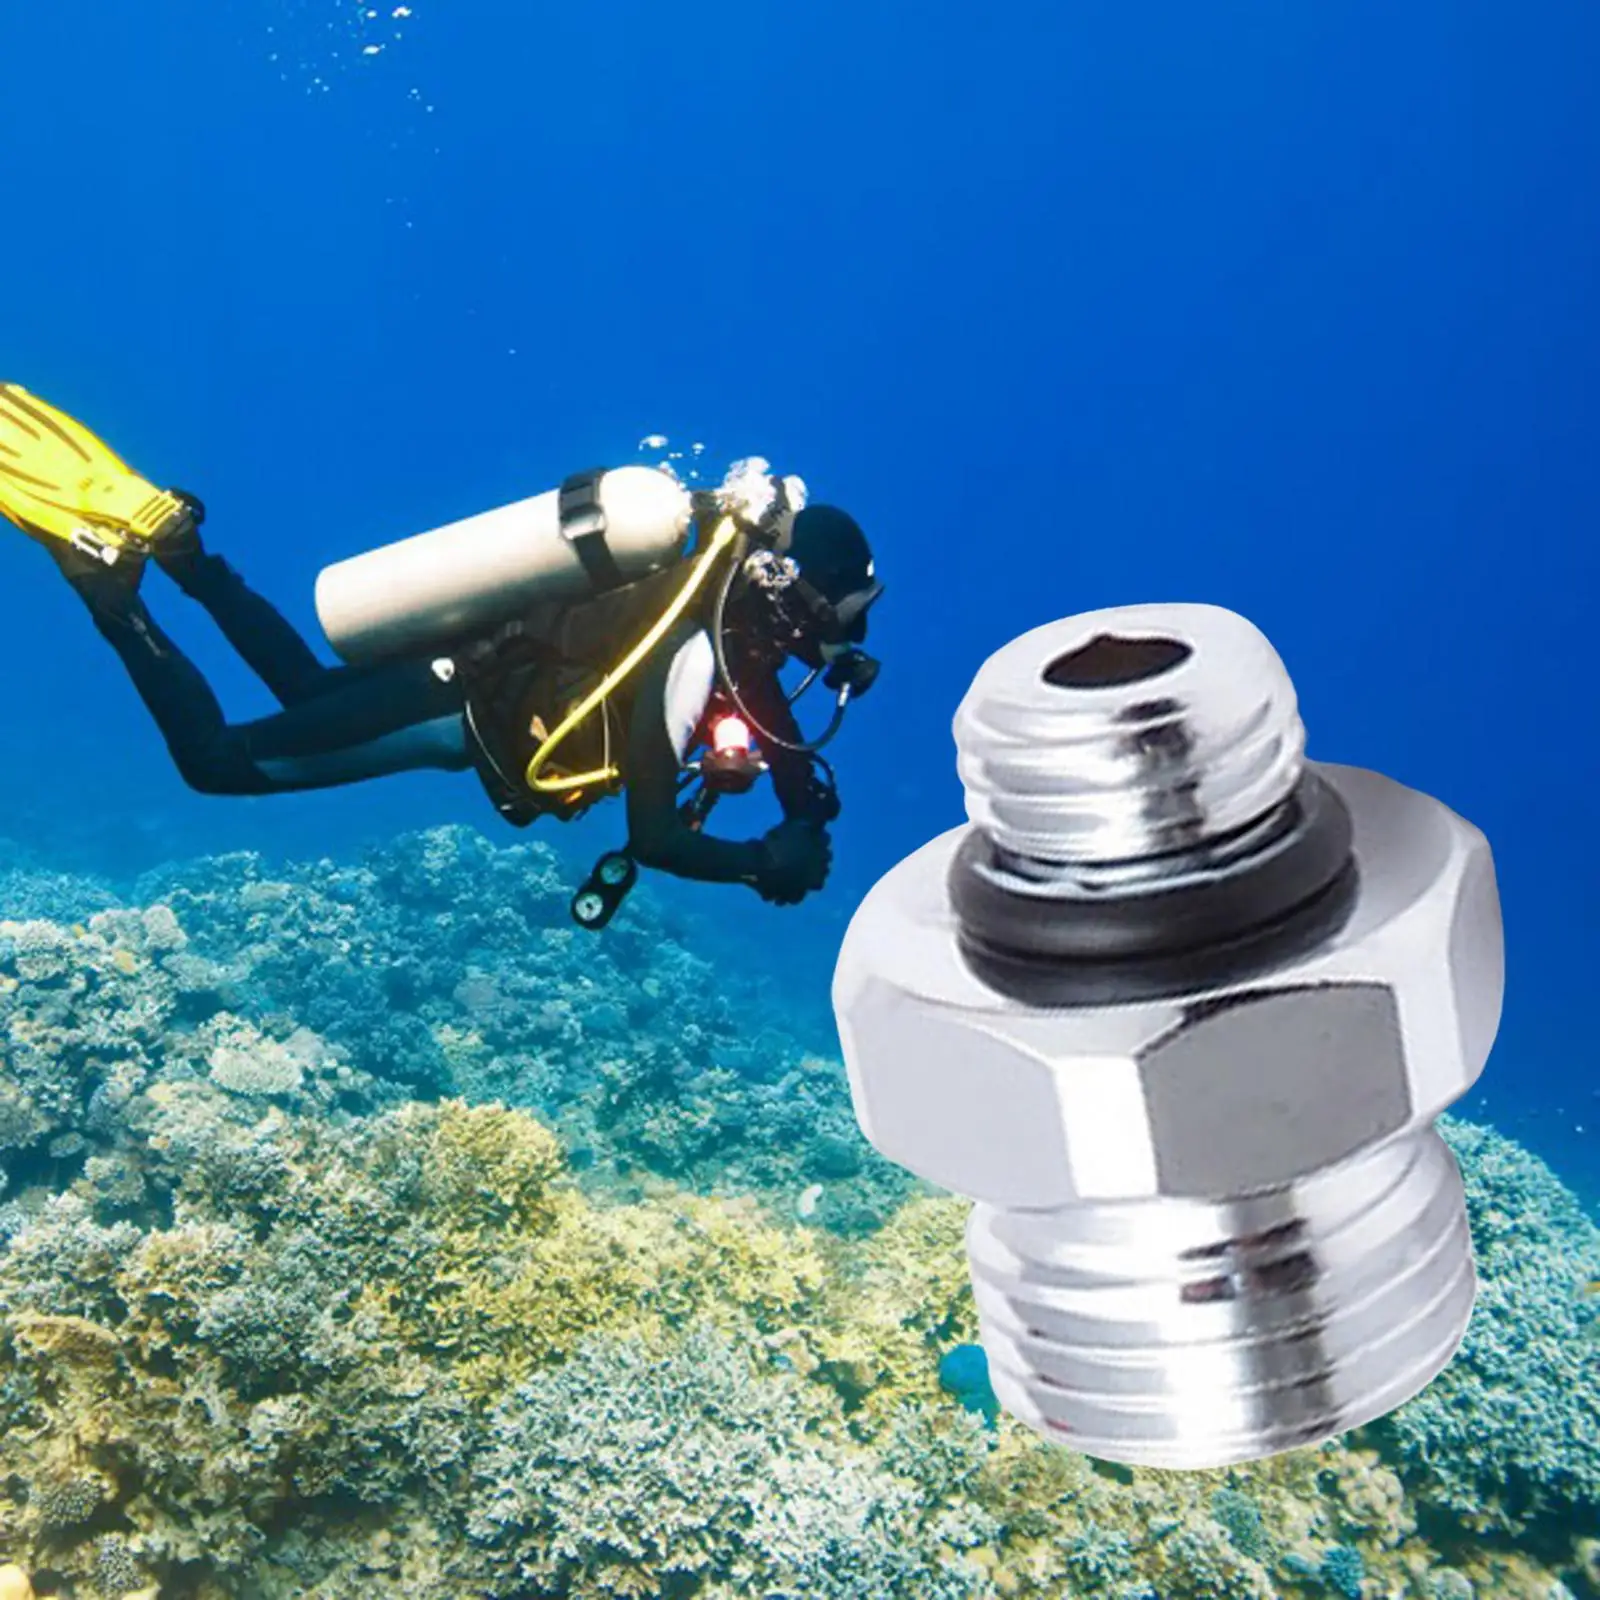 Scuba Diving Dive Regulator Adapter Free Diving Brass Male 3/8-24 to Male 9/16-18 Adapter Converter Direct Joint Supplies